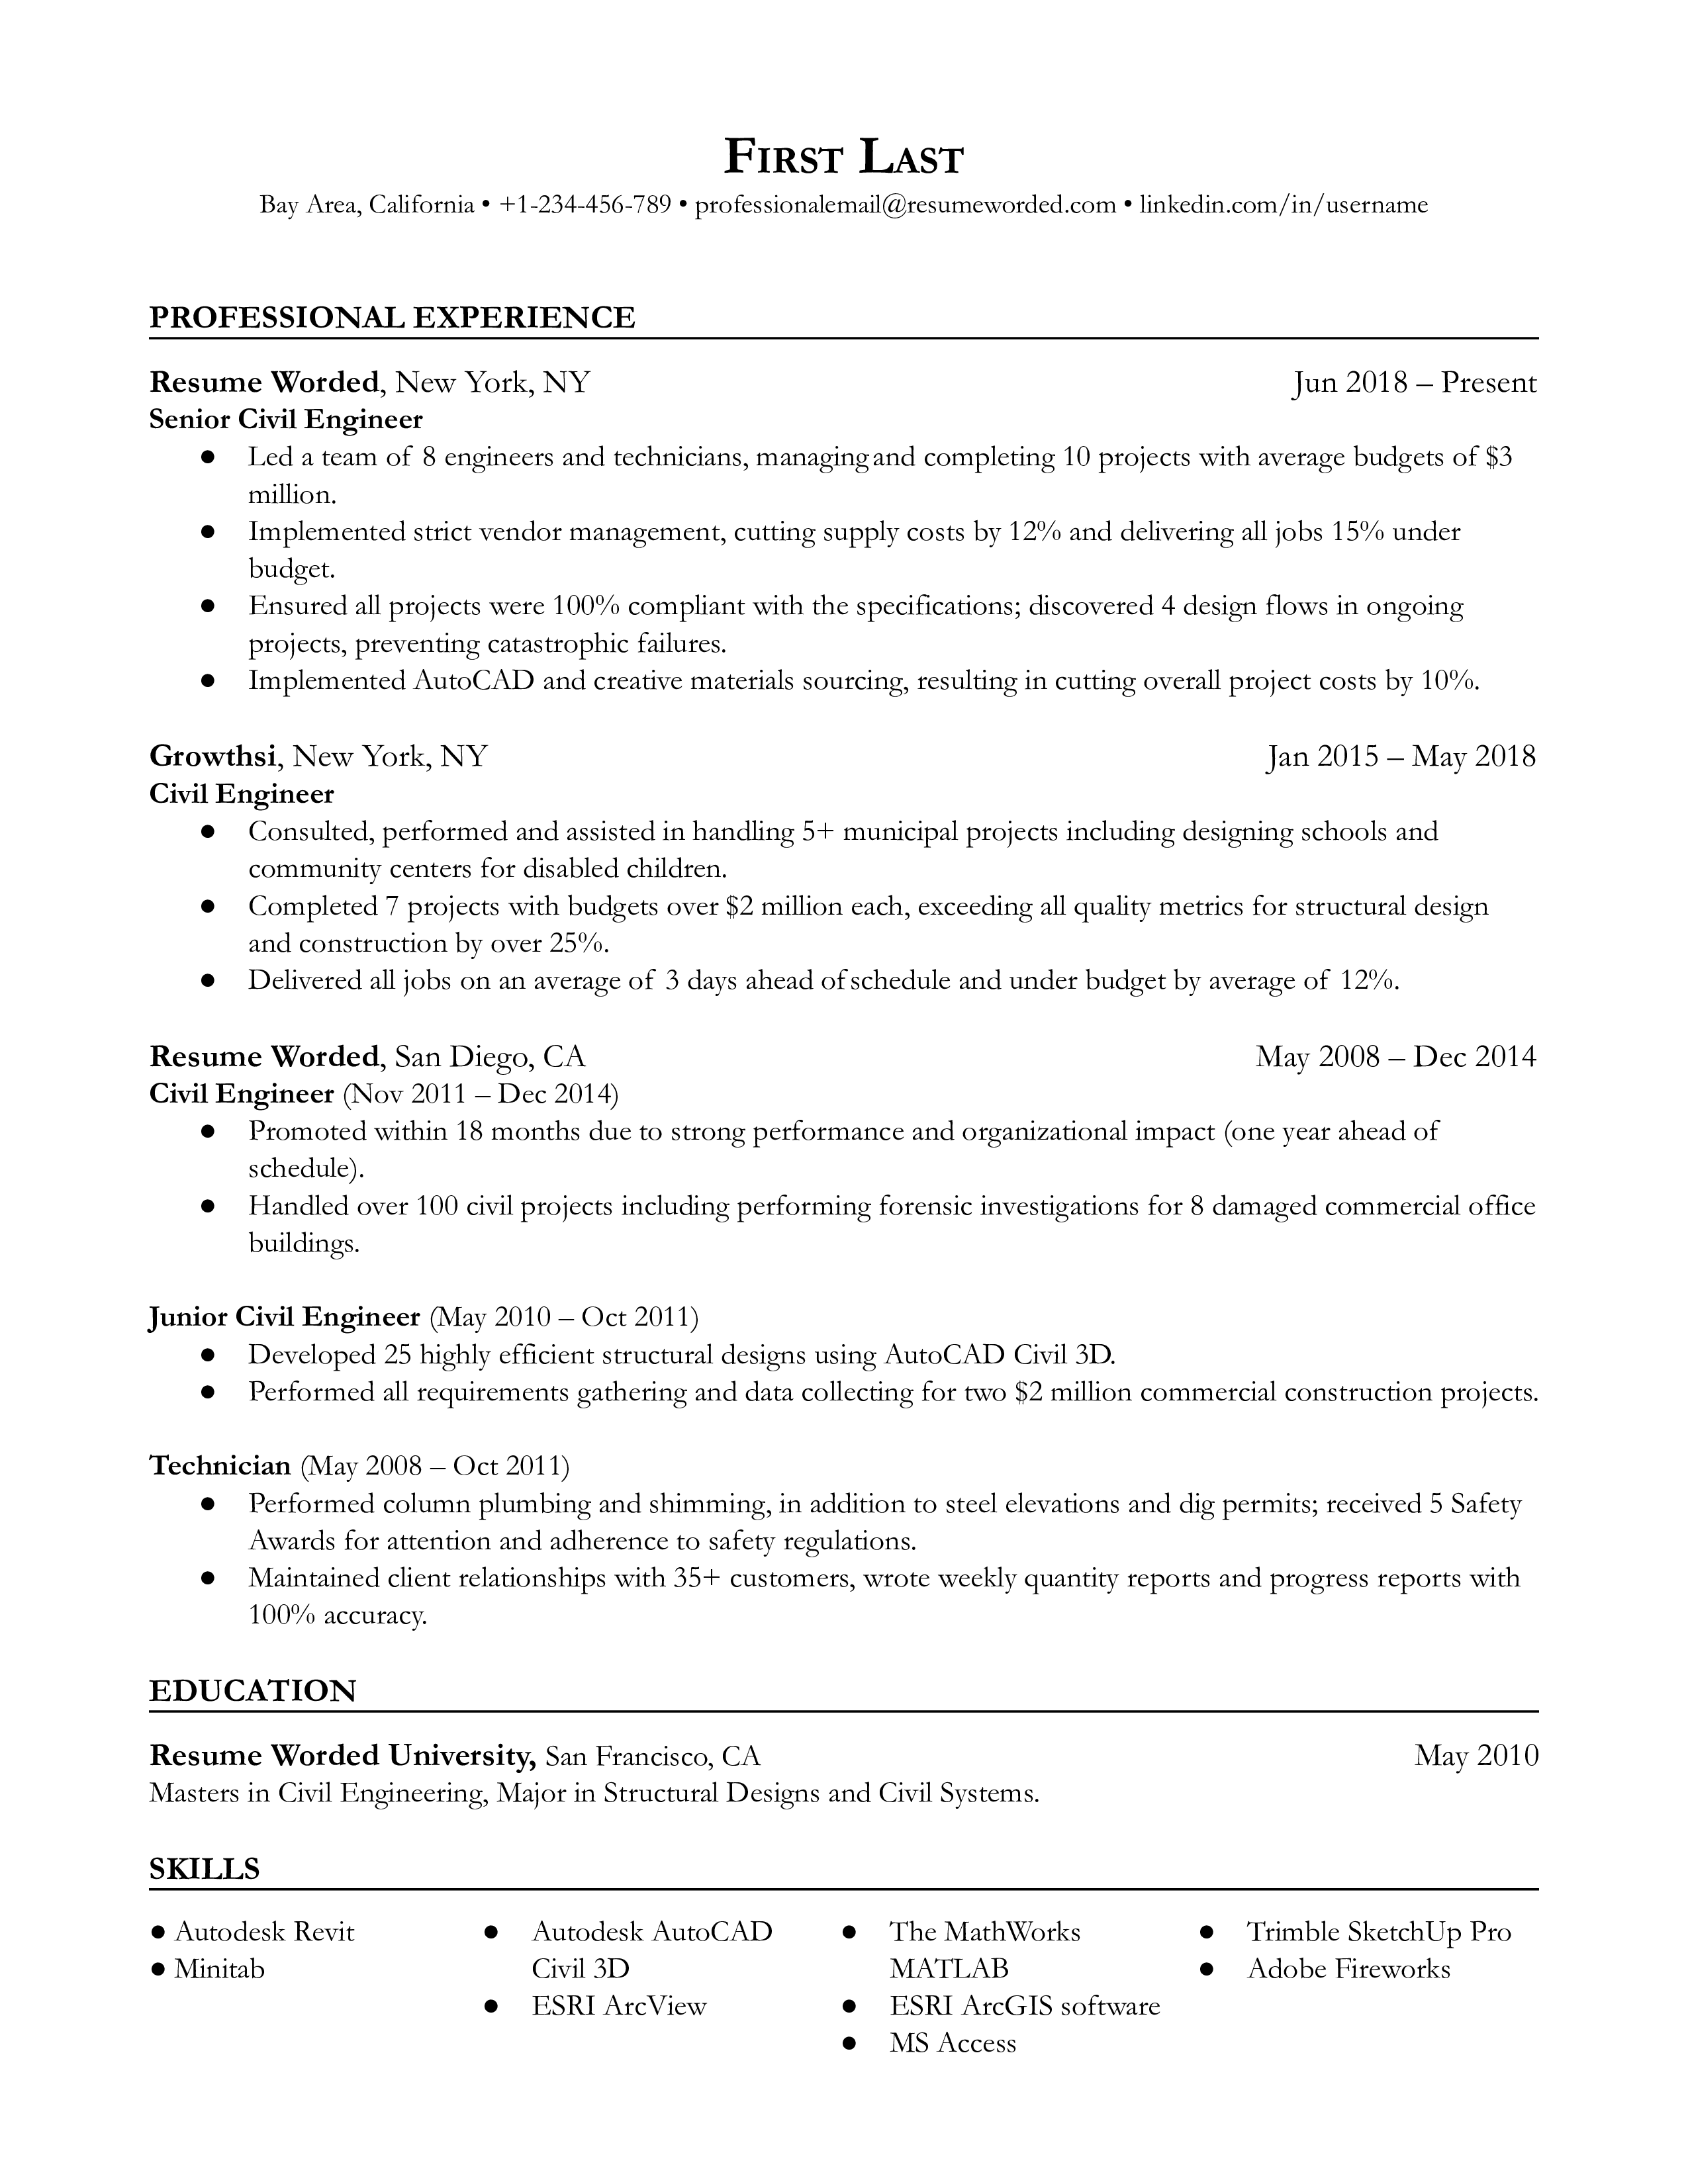 A well-crafted CV for a Civil Engineer showcasing relevant skills and project experiences.